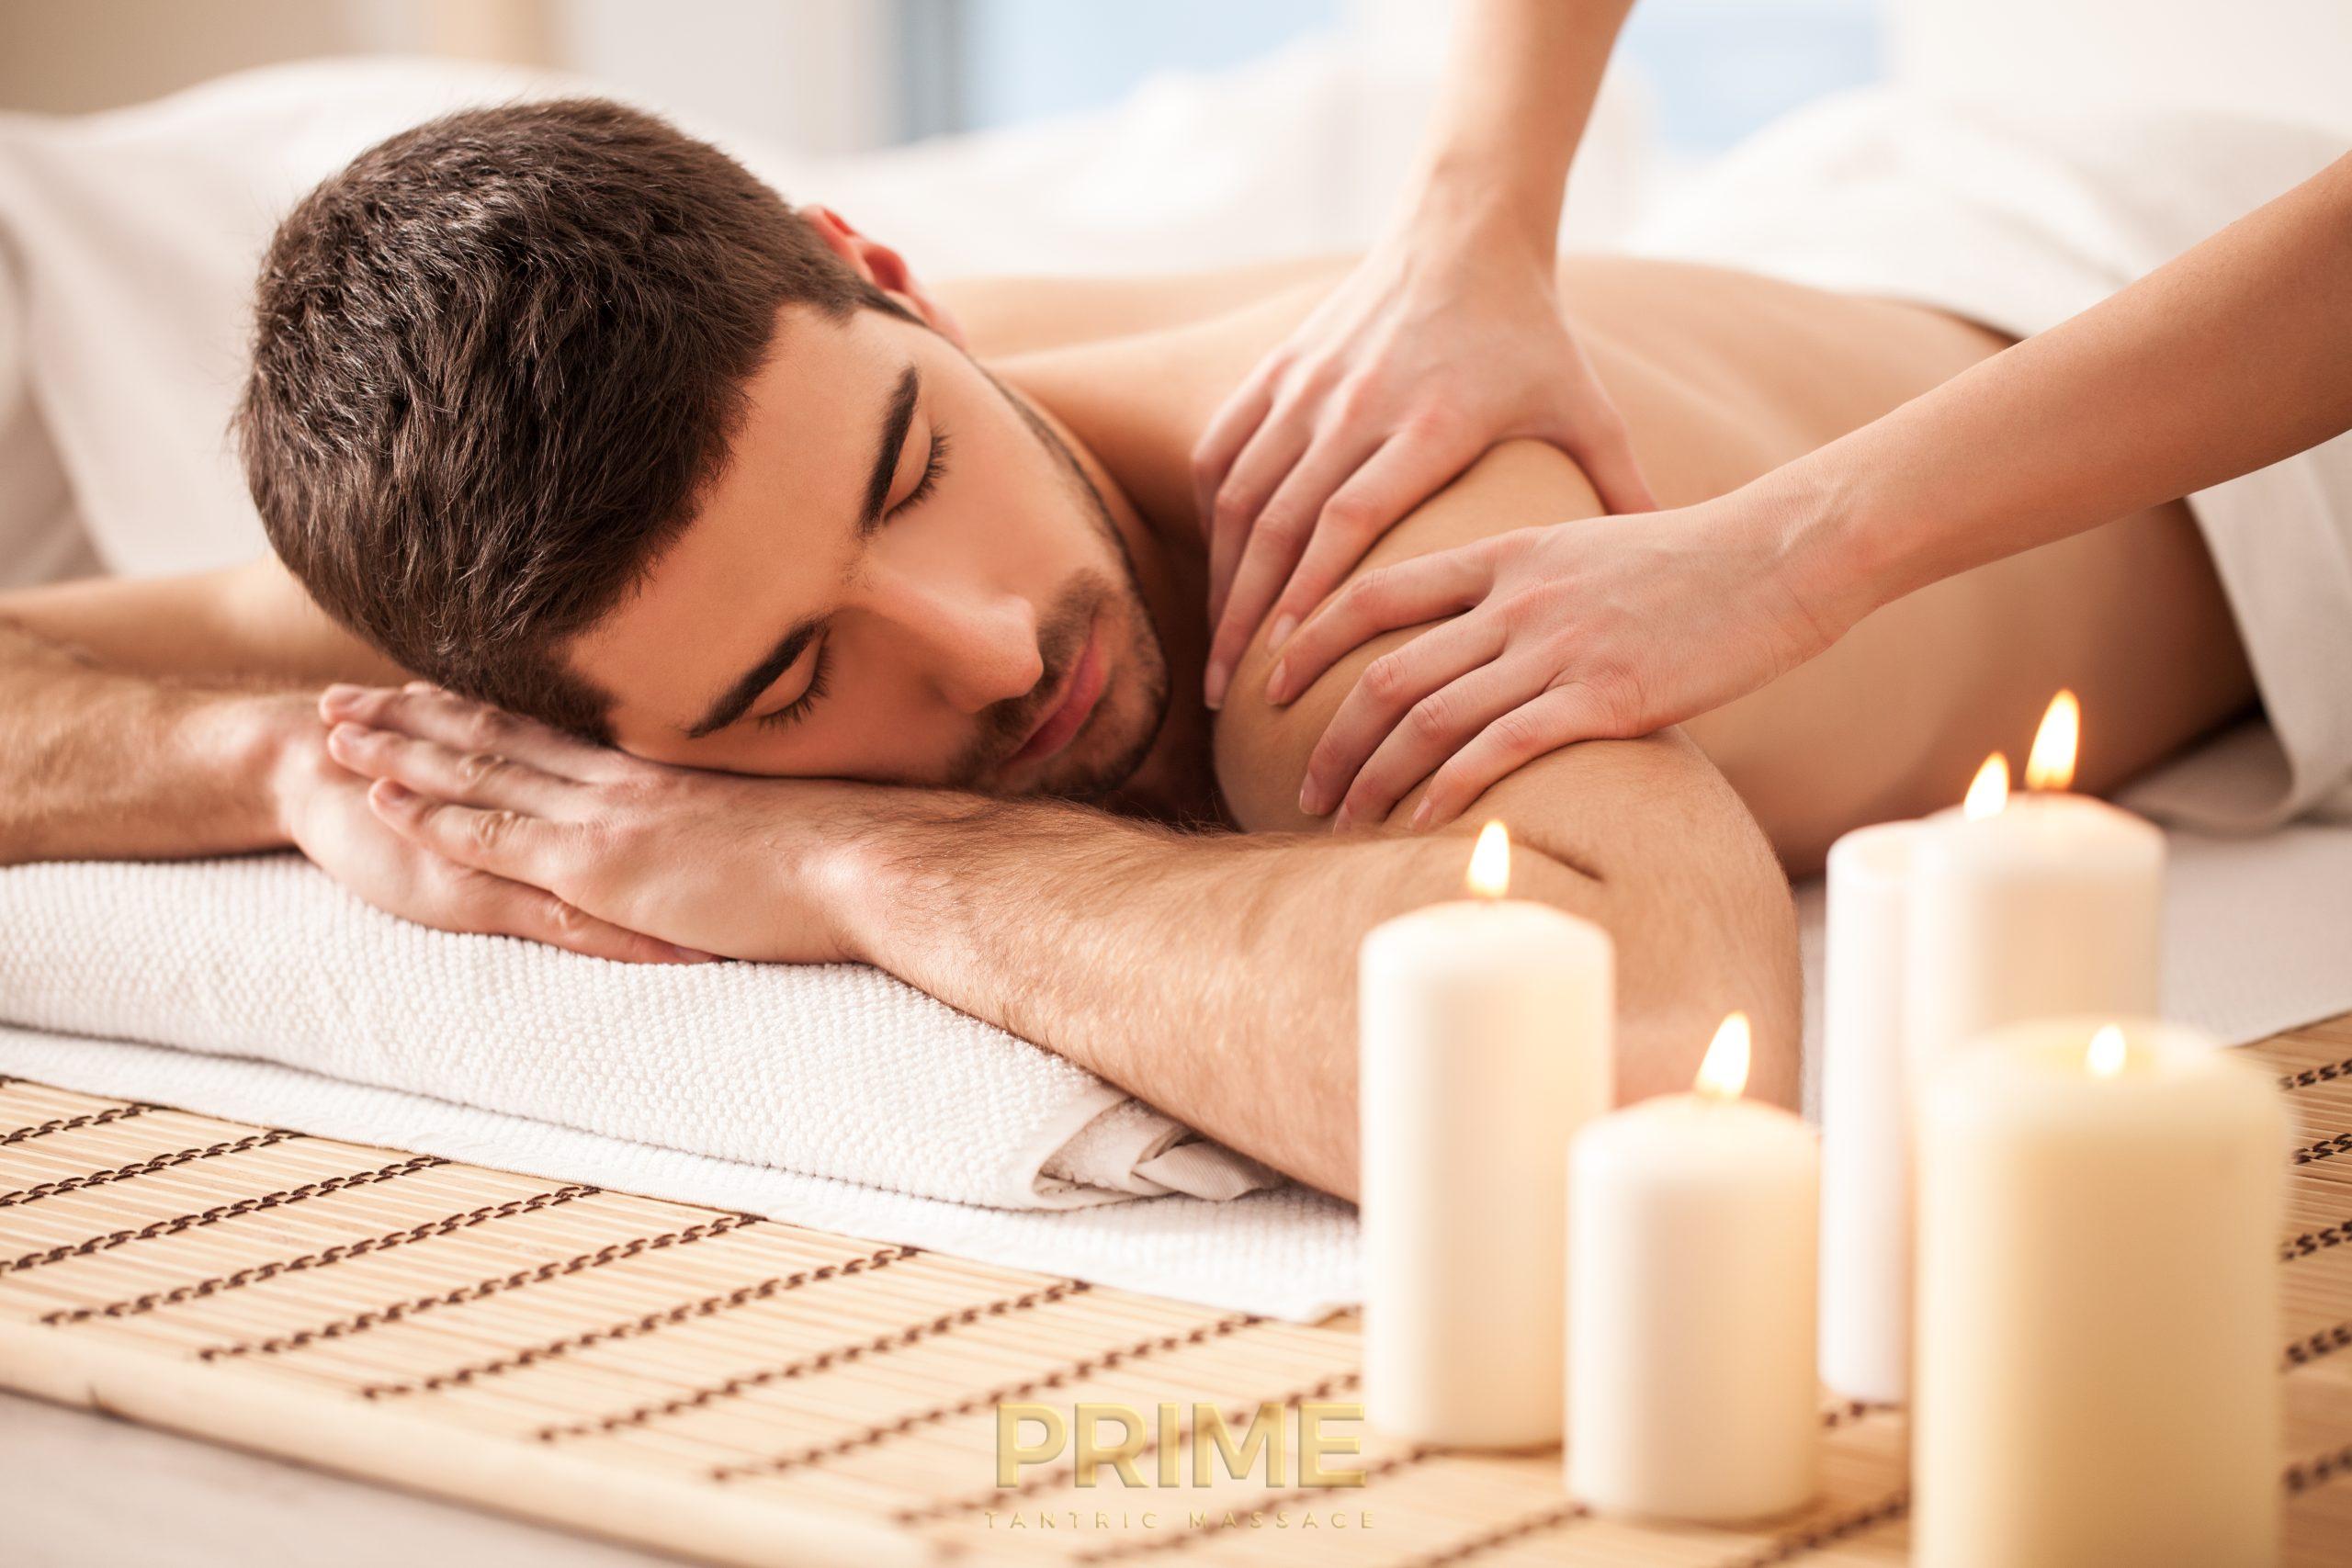 Which Body Part Benefits Most from a Massage?